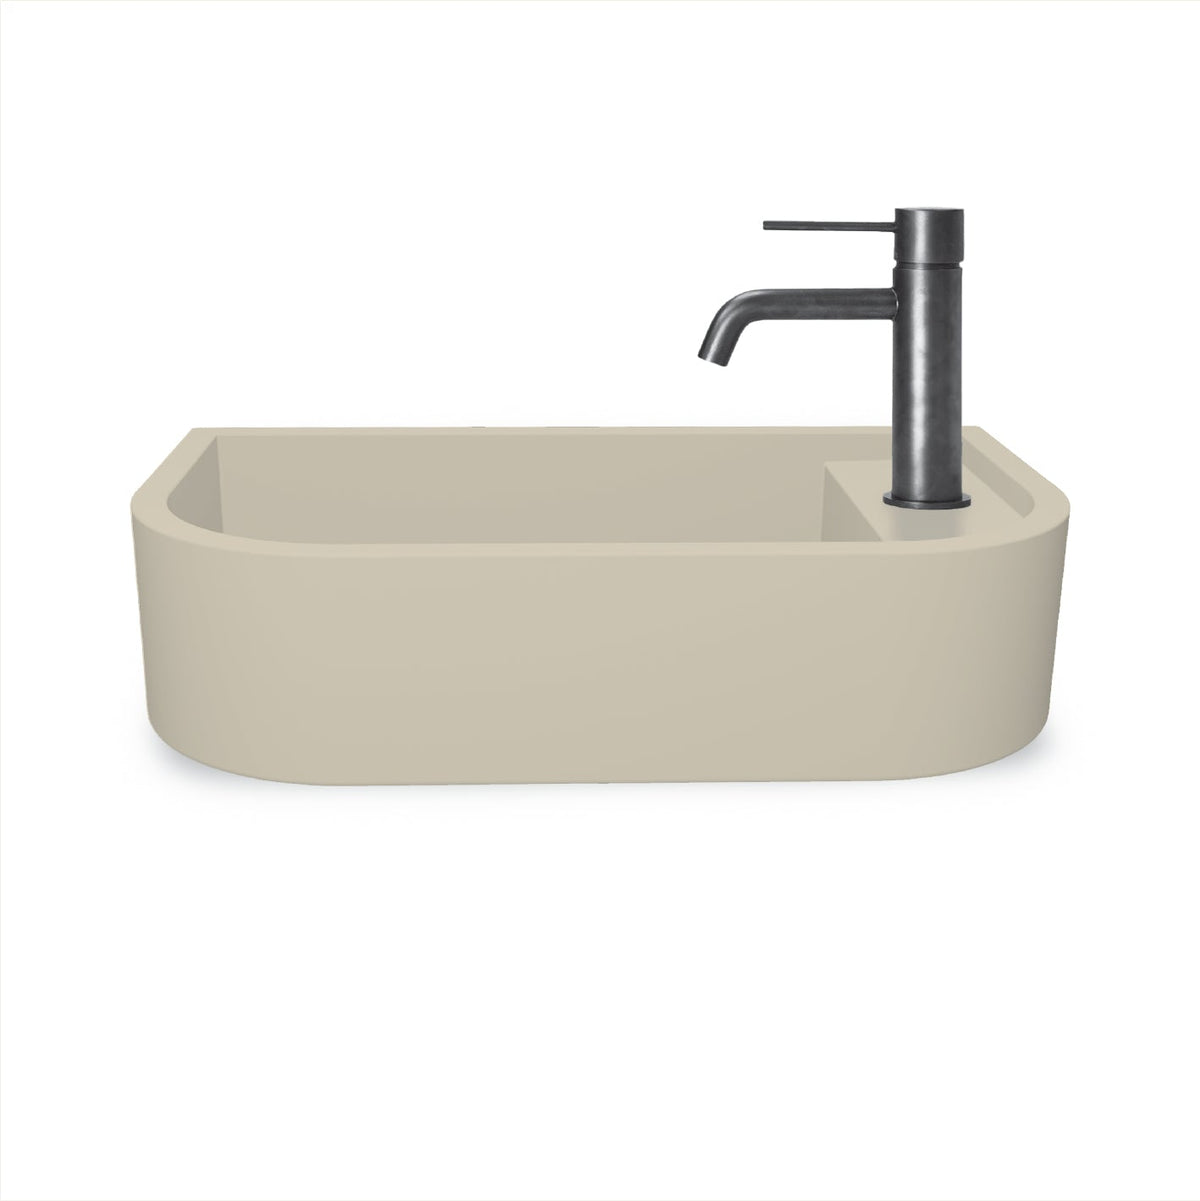 Loop 02 Basin - Overflow - Wall Hung (Sand,Tap Hole,White)